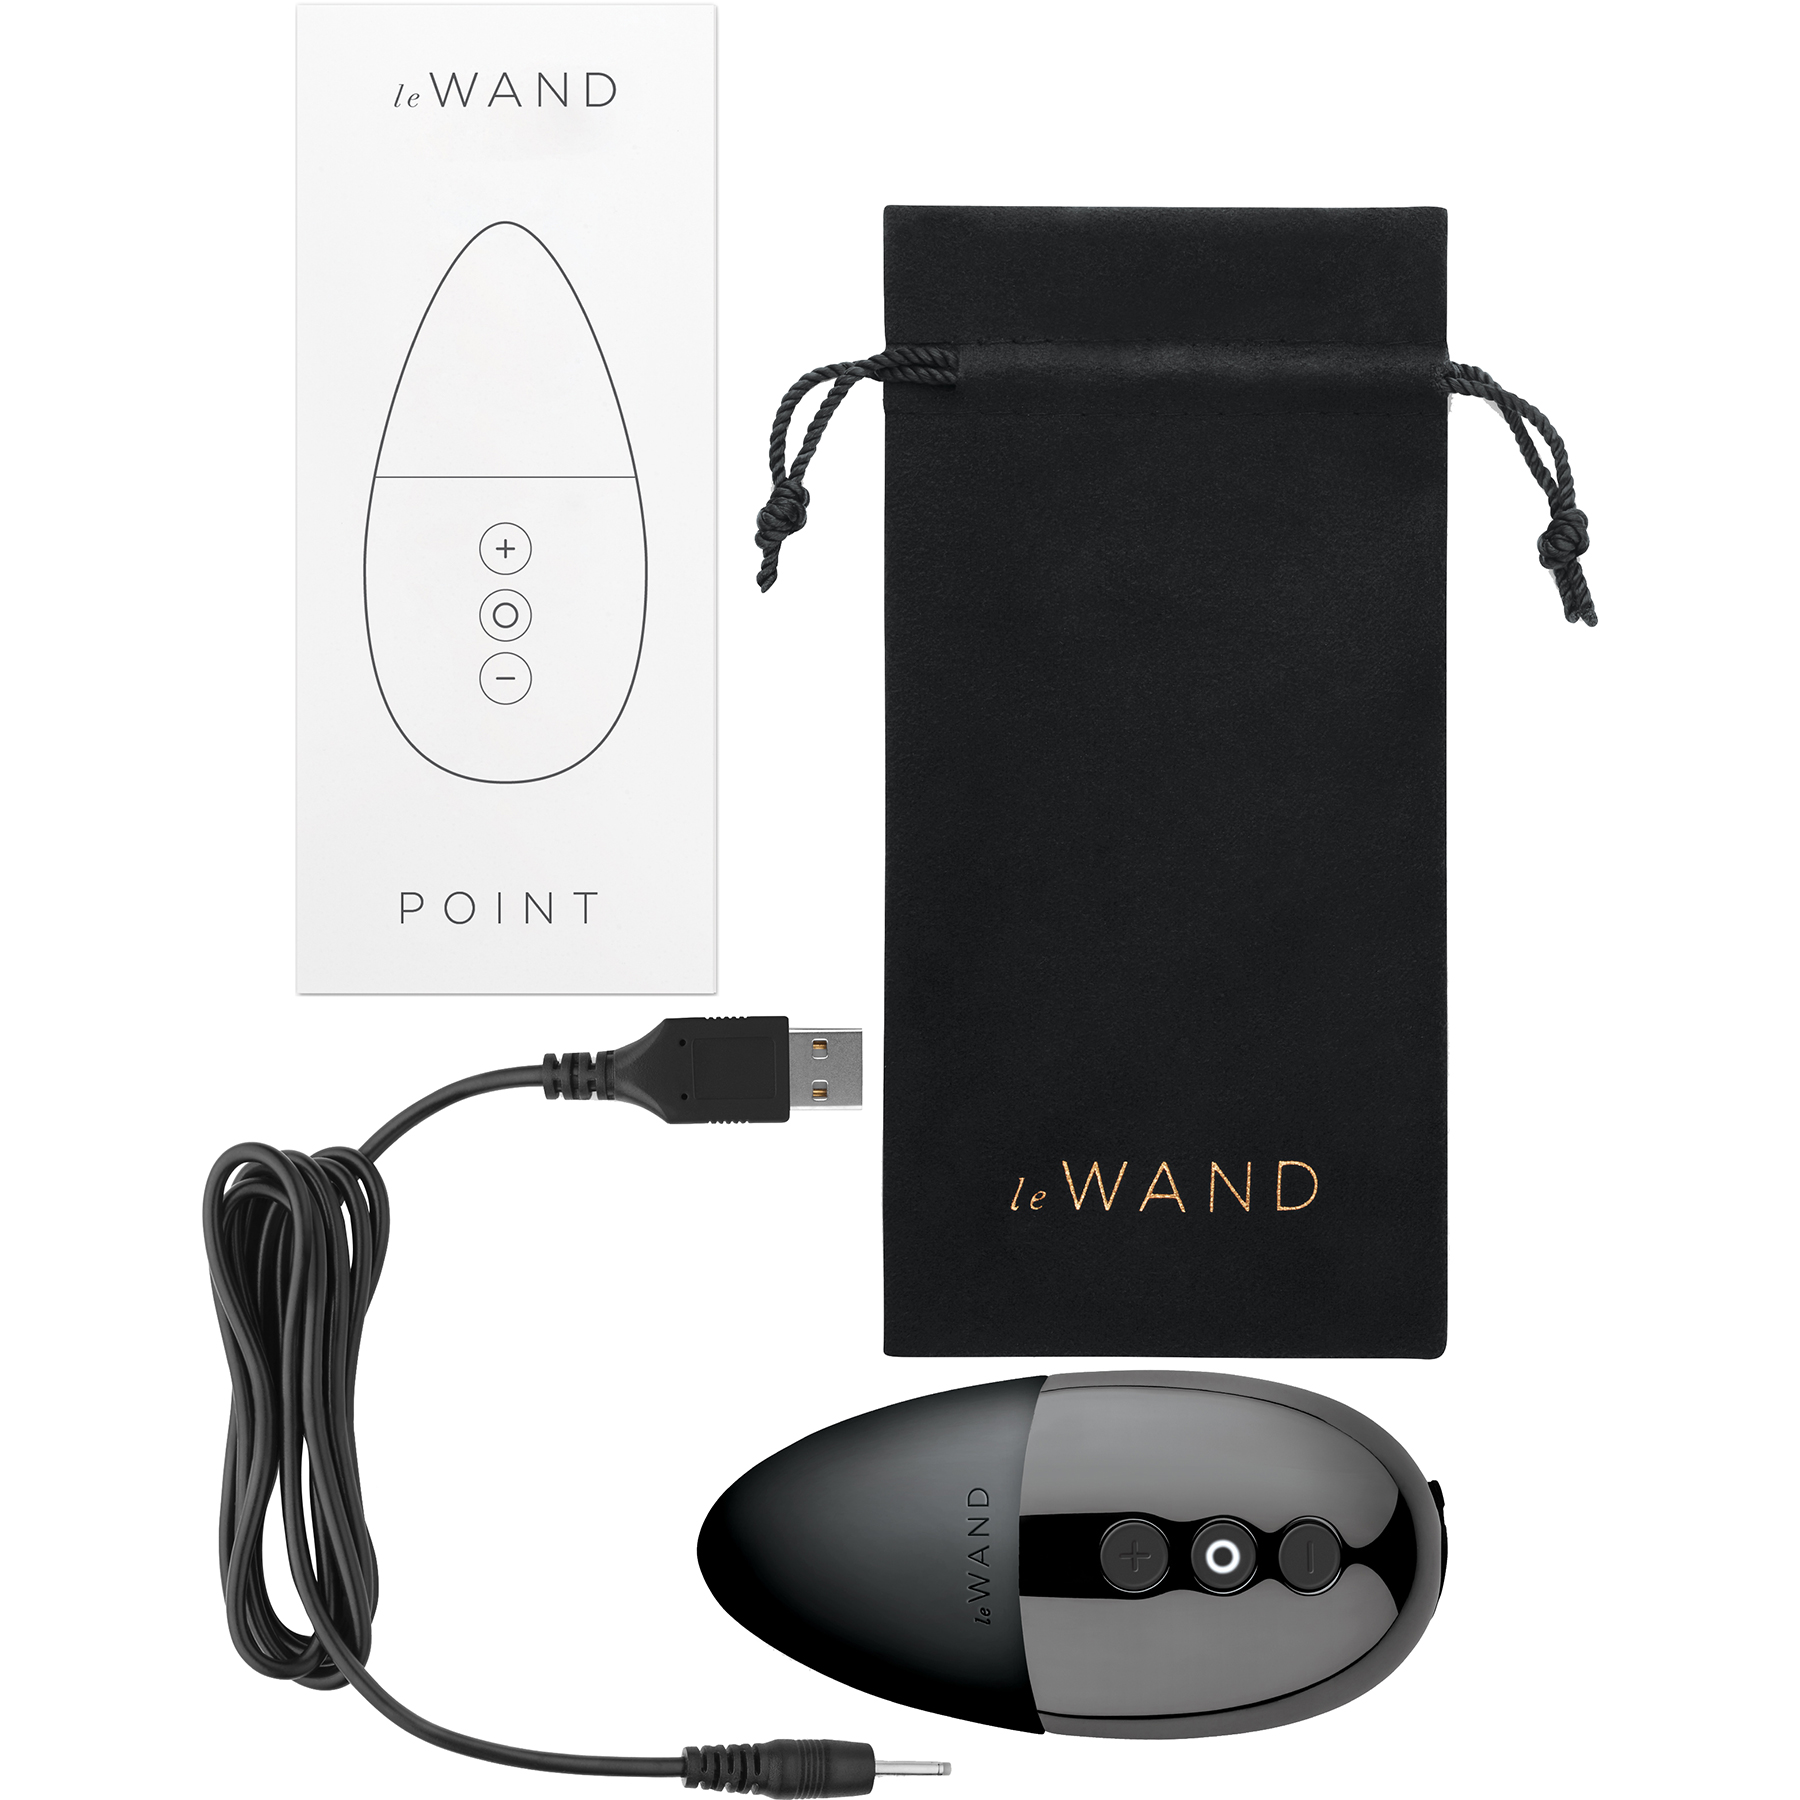 Le Wand Point Powerful Waterproof Rechargeable Vibrator - Box Contents